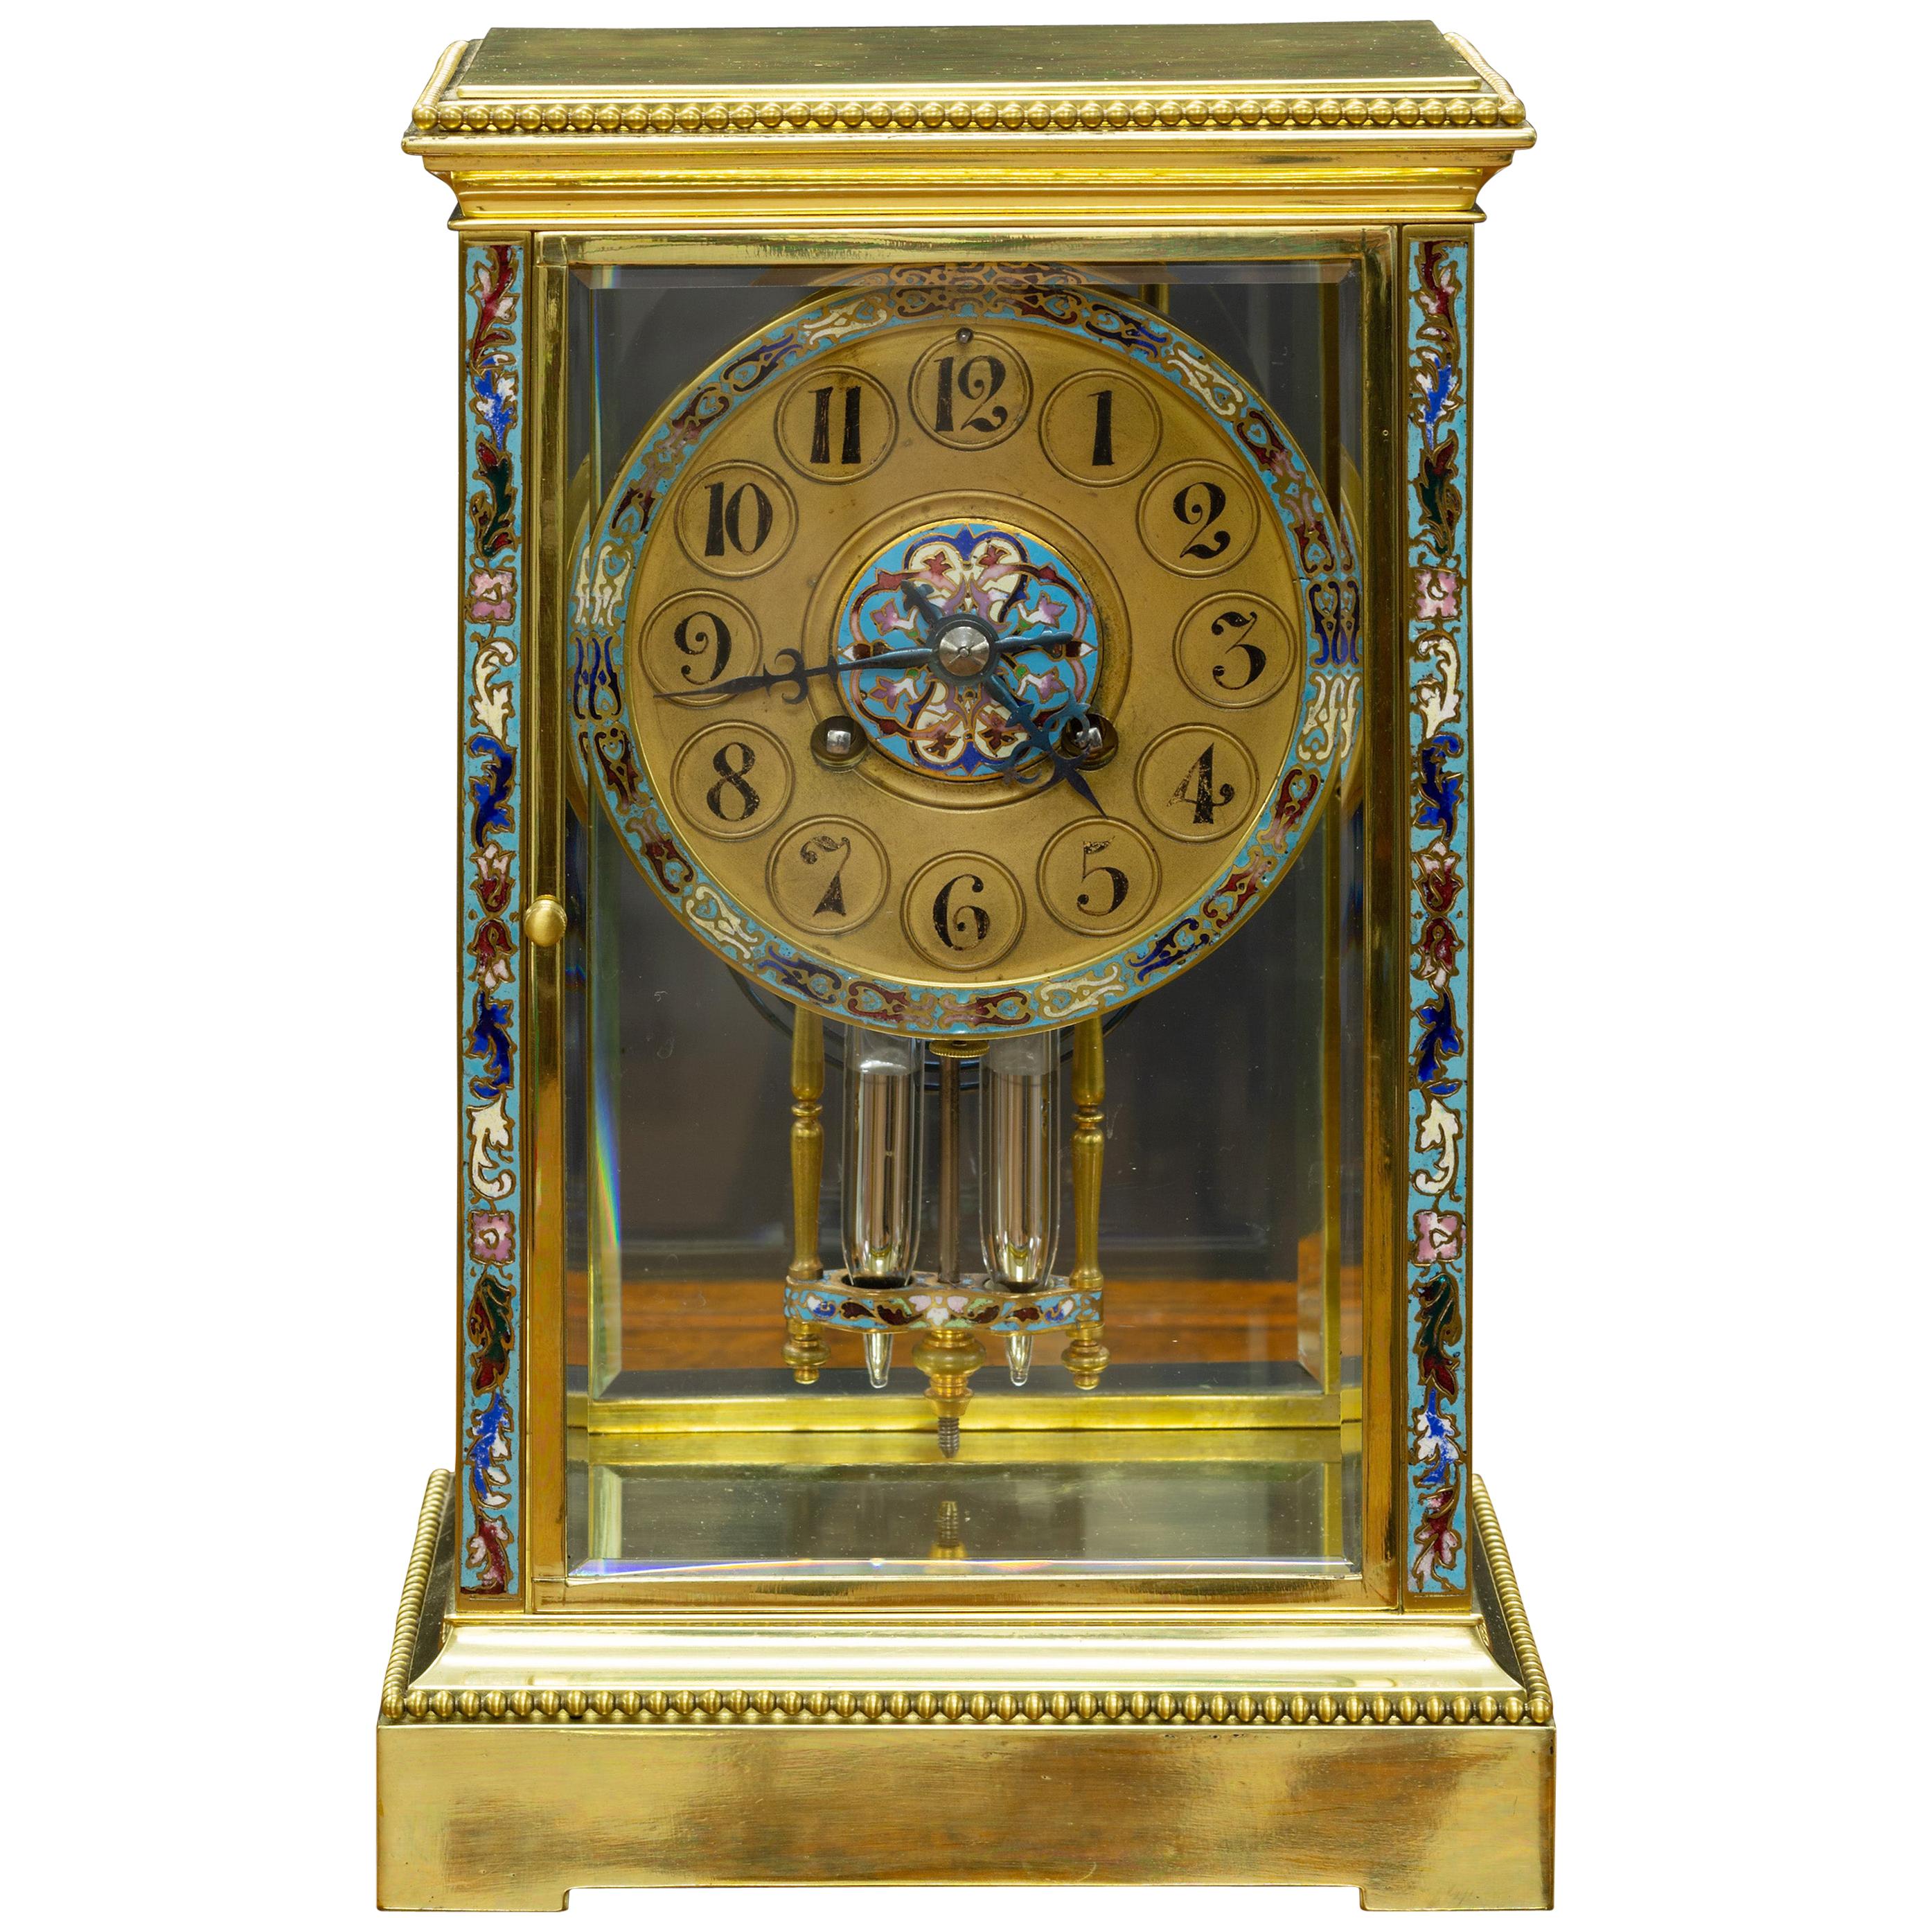 French Four Glass Mantel Clock with Champleve Decoration